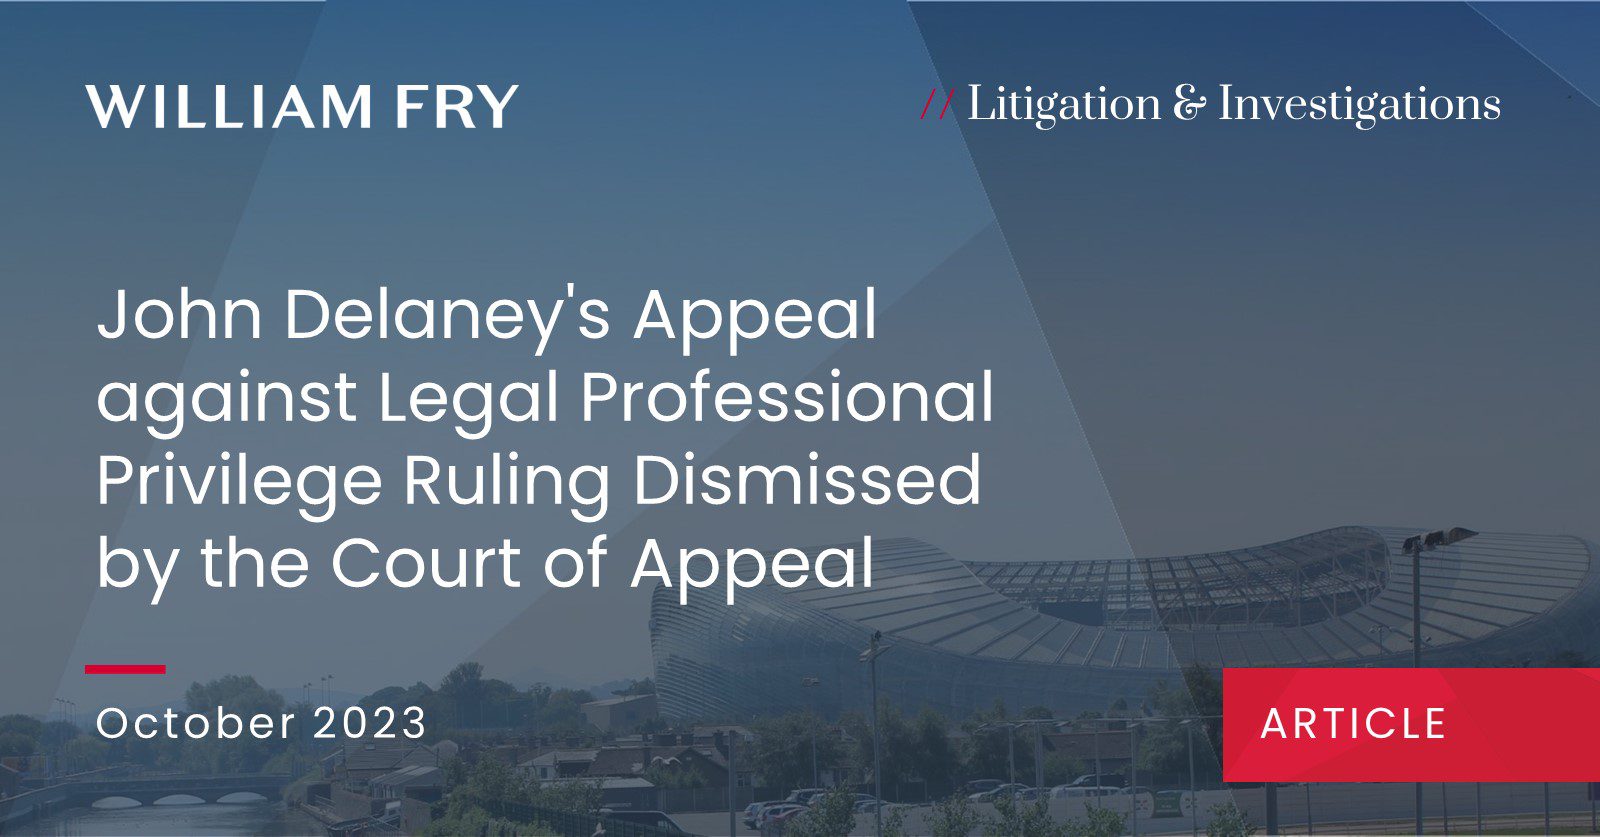 John Delaney's Appeal against Legal Professional Privilege Ruling Dismissed by the Court of Appeal